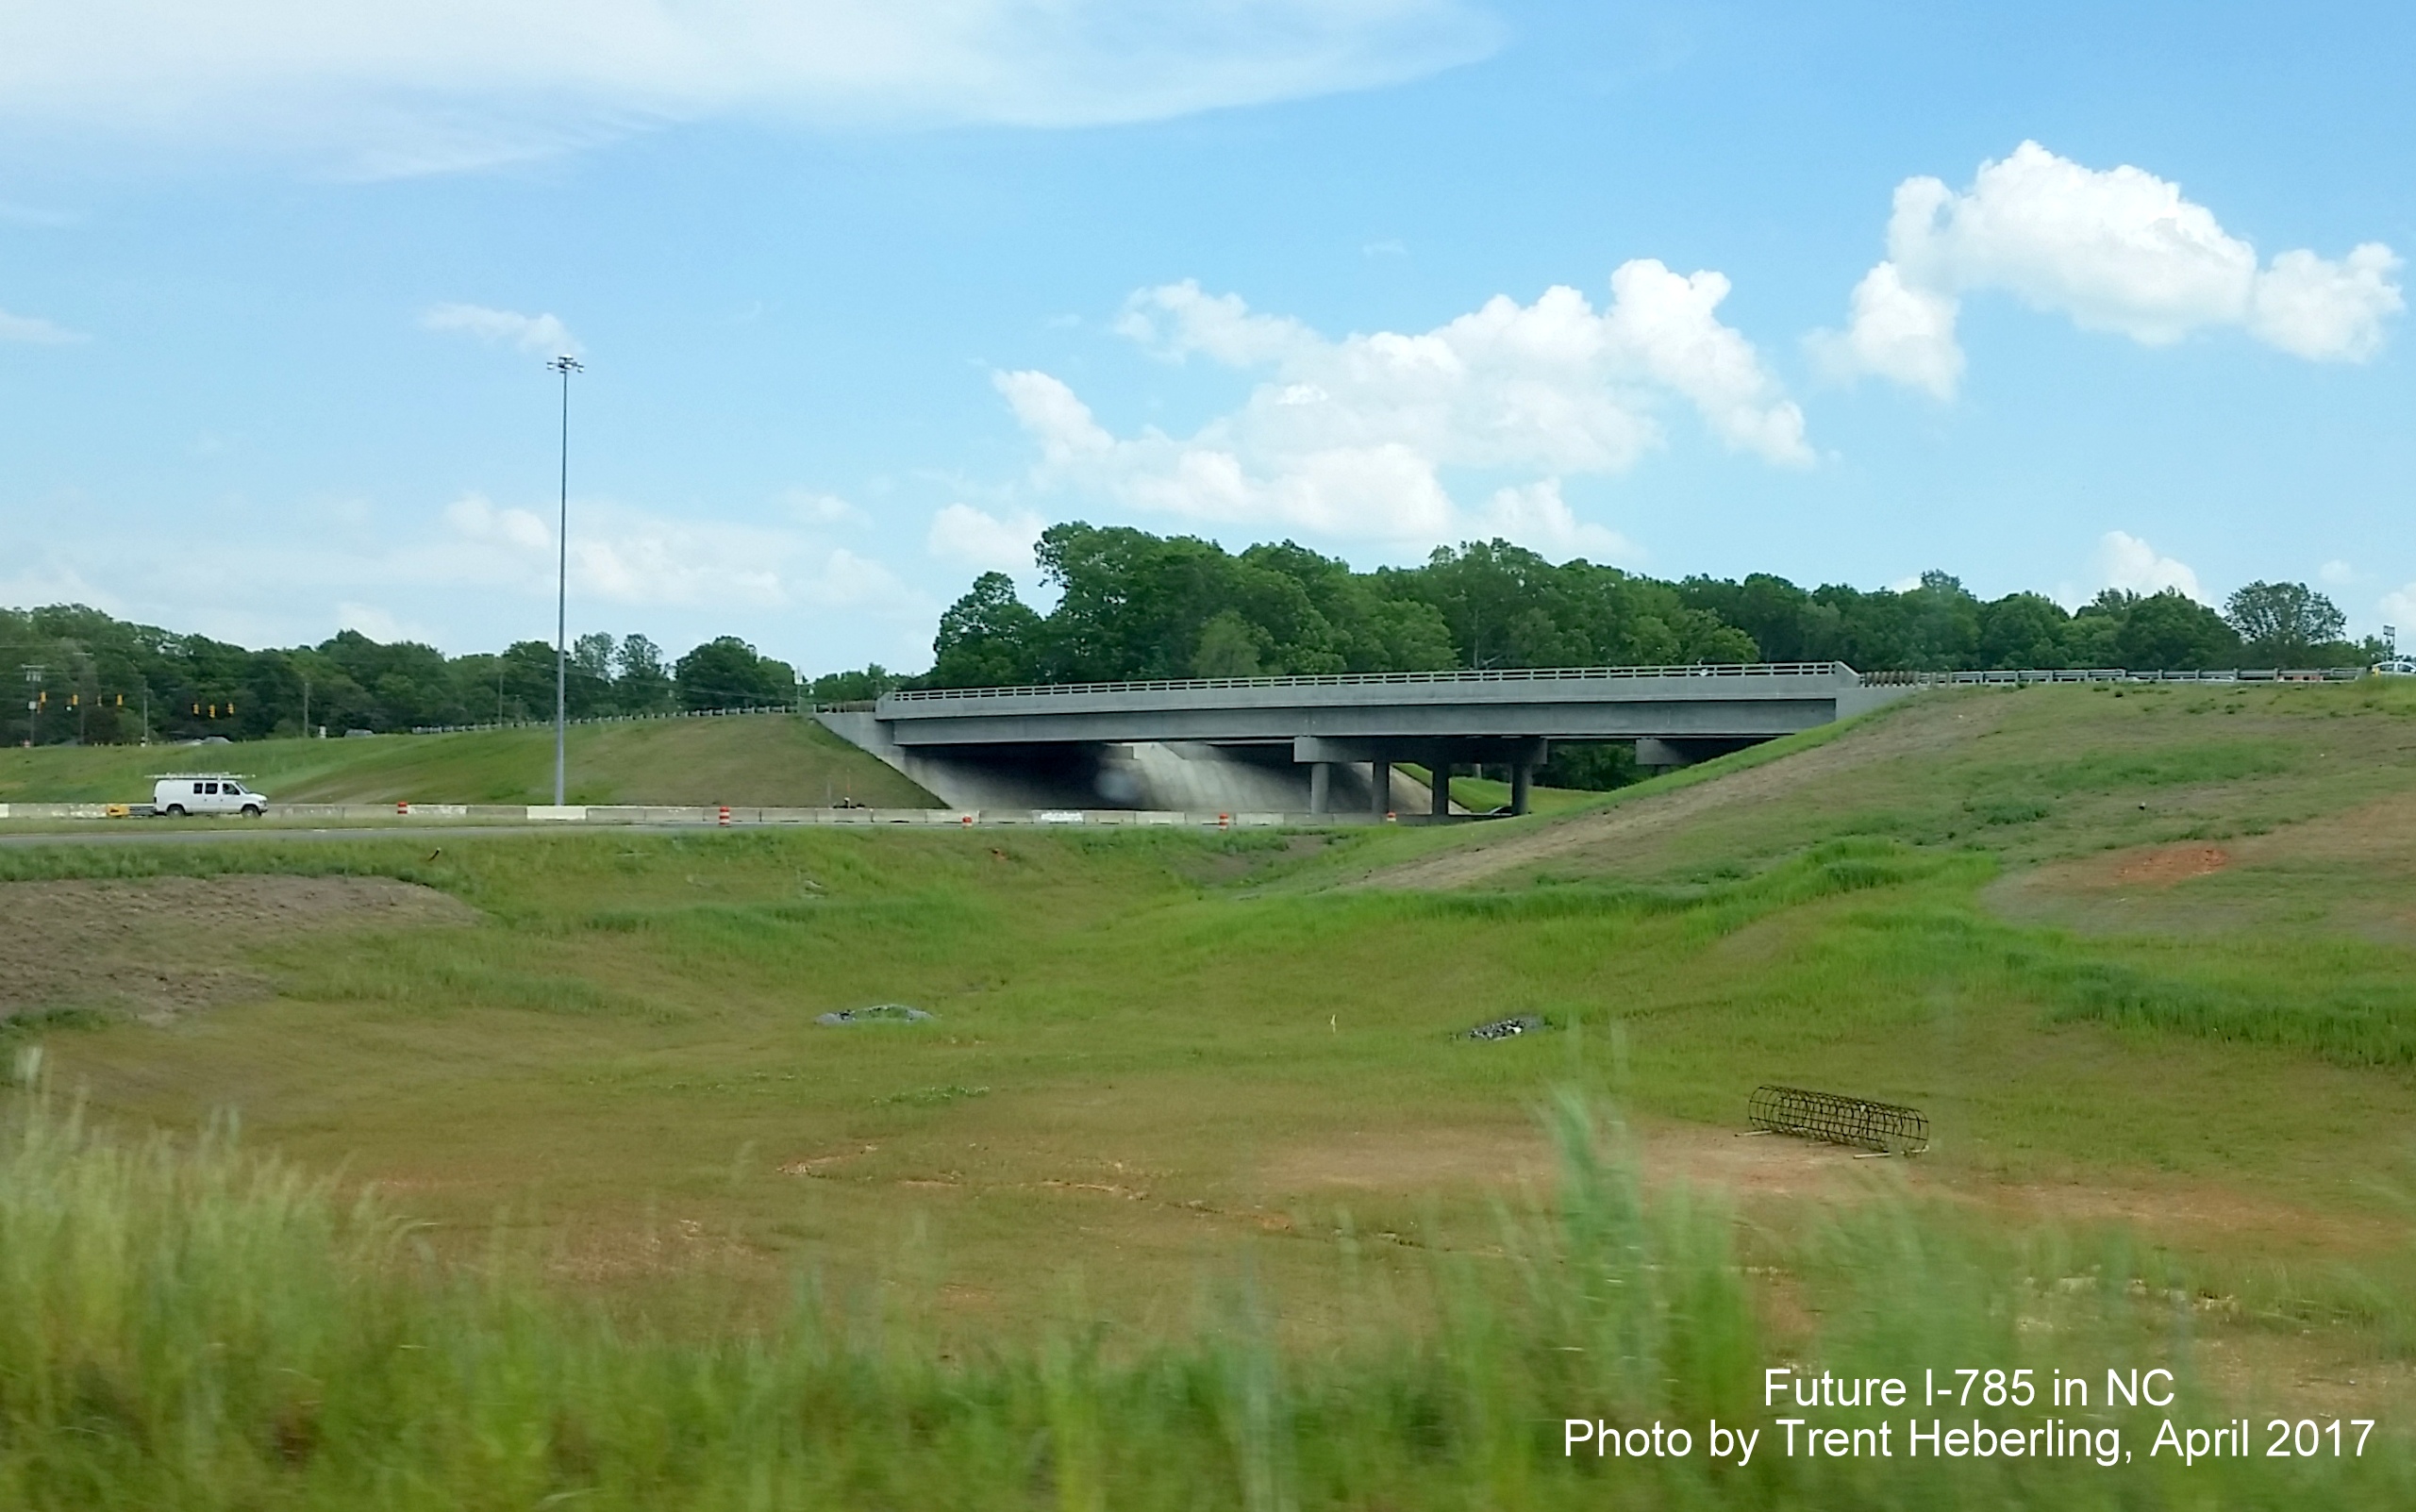 Image of I-785 bridge under construction over US 29, by Trent Heberling